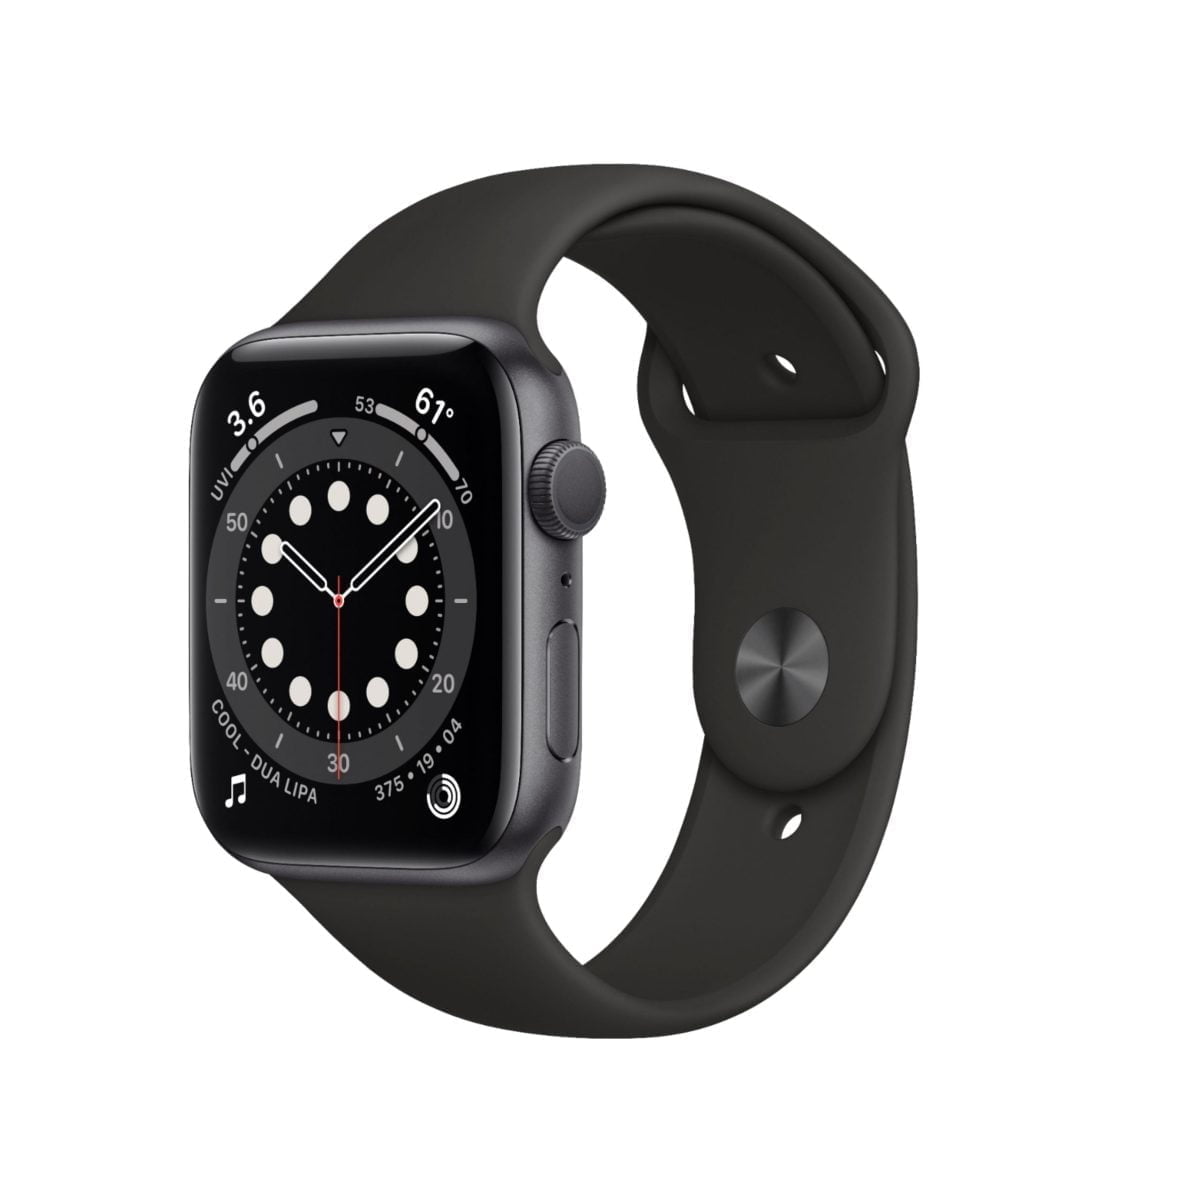 6215931 Sd Scaled Apple &Amp;Lt;Div Class=&Amp;Quot;Sku-Title&Amp;Quot;&Amp;Gt; &Amp;Lt;H1 Class=&Amp;Quot;Heading-5 V-Fw-Regular&Amp;Quot;&Amp;Gt;Apple Watch Series 6 (Gps) 44Mm Space Gray Aluminum Case With Black Sport Band - Space Gray&Amp;Lt;/H1&Amp;Gt; &Amp;Lt;/Div&Amp;Gt; &Amp;Lt;Div Class=&Amp;Quot;Long-Description-Container Body-Copy &Amp;Quot;&Amp;Gt; &Amp;Lt;Div Class=&Amp;Quot;Product-Description&Amp;Quot;&Amp;Gt;Apple Watch Series 6 Lets You Measure Your Blood Oxygen Level With A Revolutionary New Sensor And App.¹ Take An Ecg From Your Wrist.² See Your Fitness Metrics On The Enhanced Always-On Retina Display, Now 2.5X Brighter Outdoors When Your Wrist Is Down. Set A Bedtime Routine And Track Your Sleep. And Reply To Calls And Messages Right From Your Wrist. It’s The Ultimate Device For A Healthier, More Active, More Connected Life.&Amp;Lt;/Div&Amp;Gt; &Amp;Lt;/Div&Amp;Gt; Apple Watch Series 6 (Gps) 44Mm Space Grey Aluminum Case With Black Sport Band - M00H3